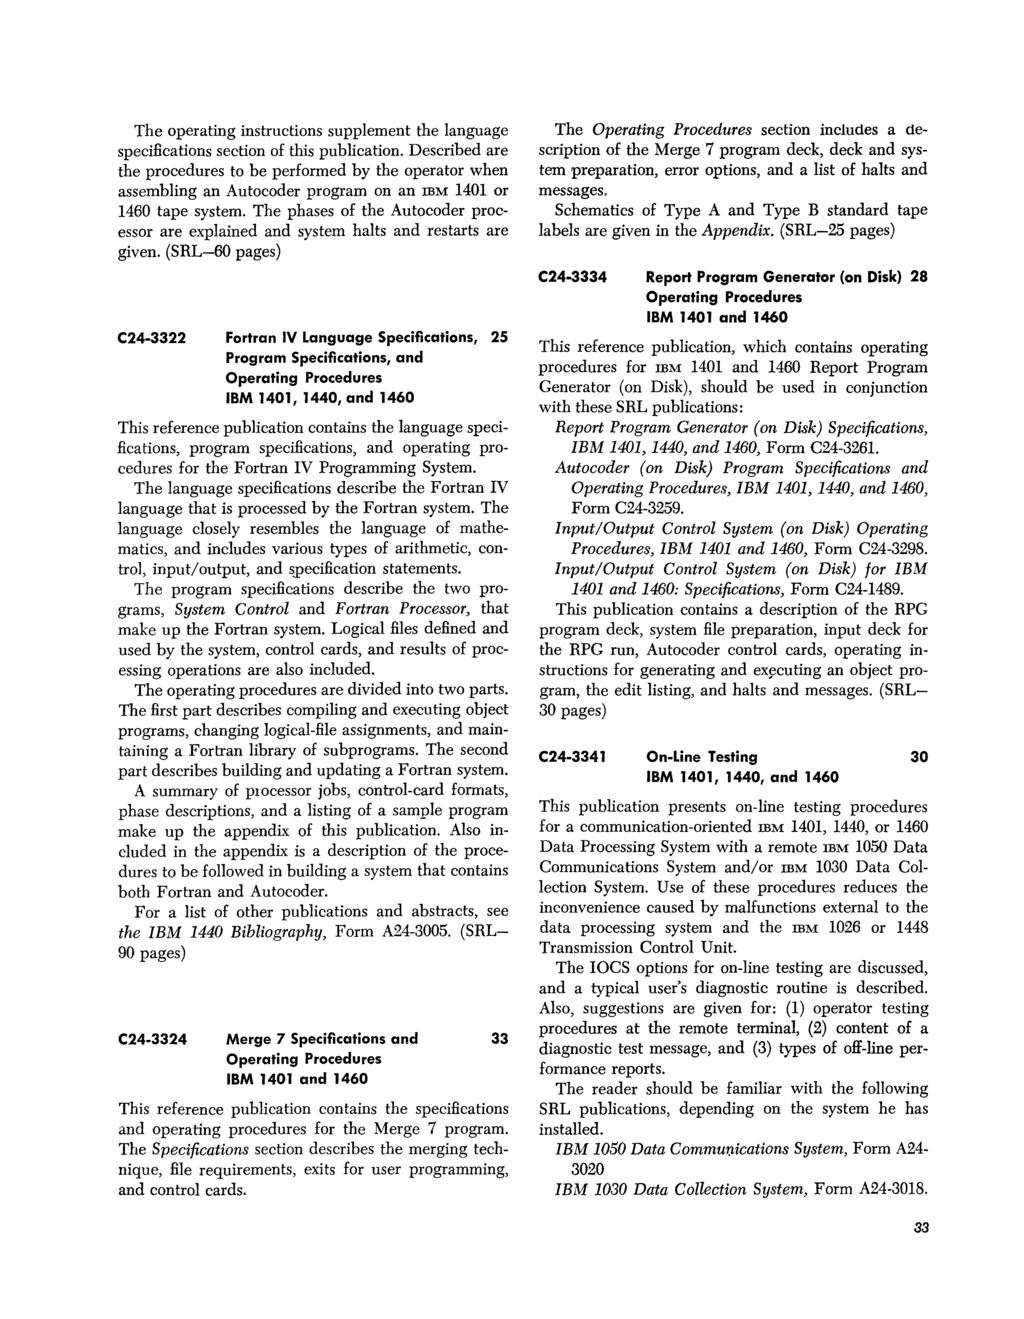 The operating instructions supplement the language specifications section of this publication.